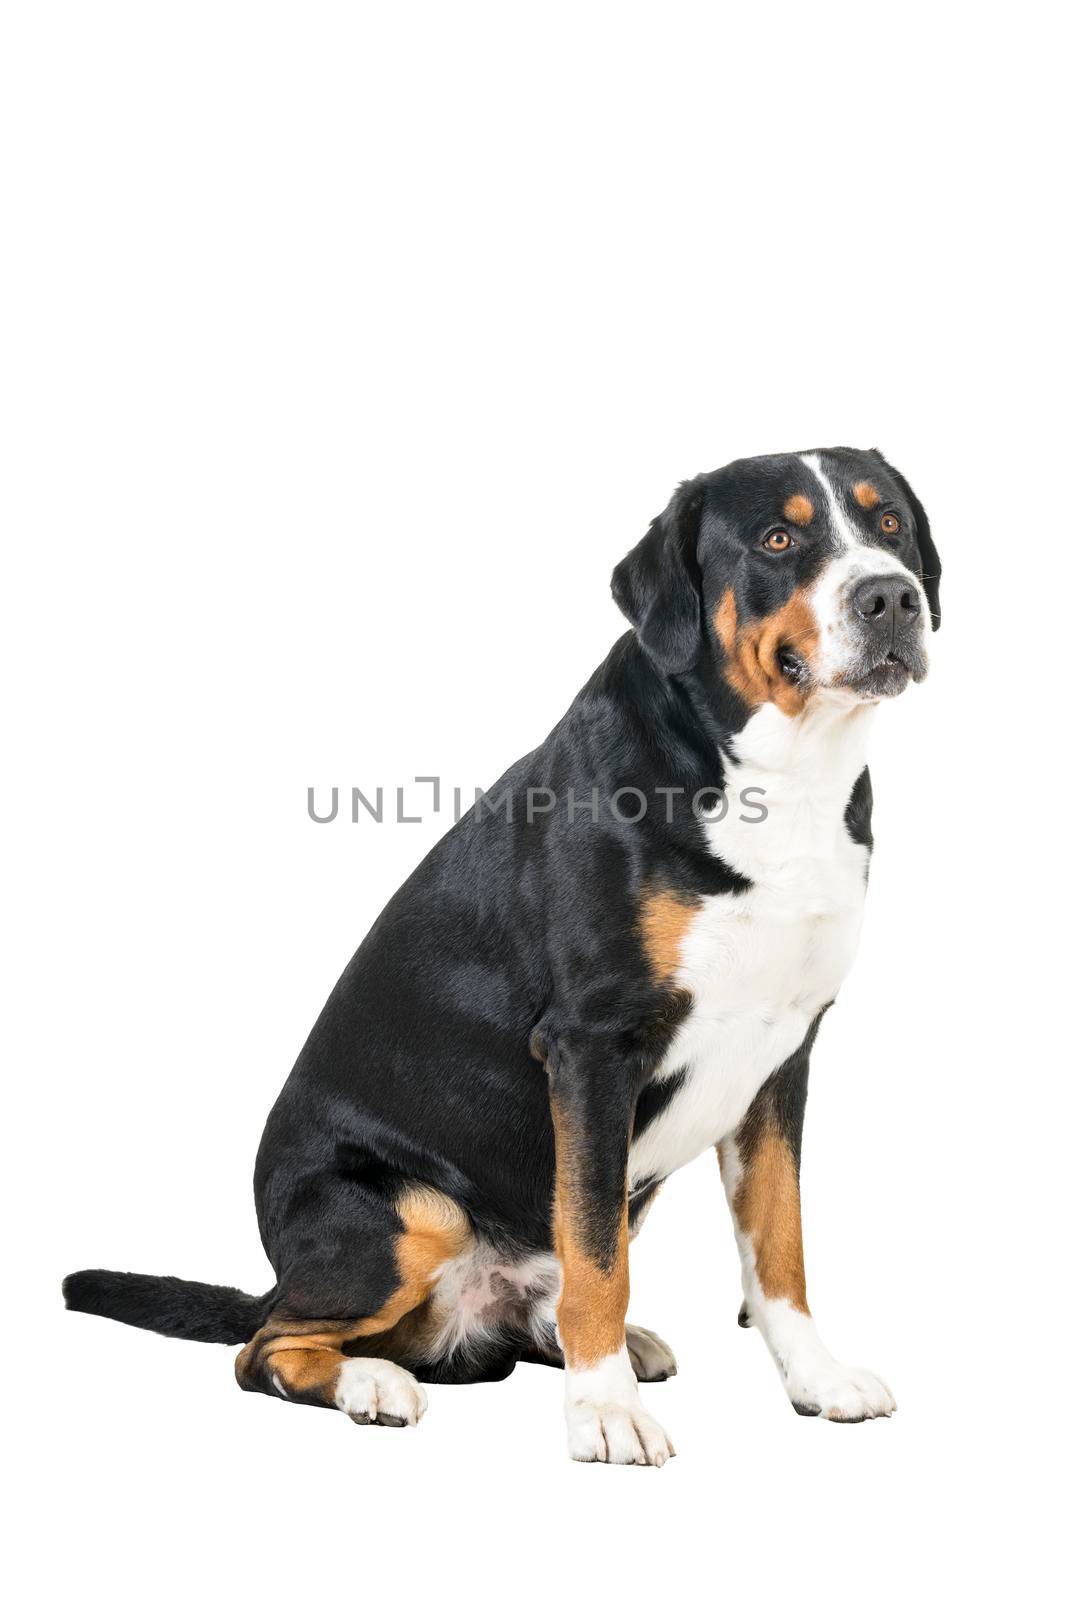 A Greater Swiss Mountain Dog sitting side ways and looking next to the camera